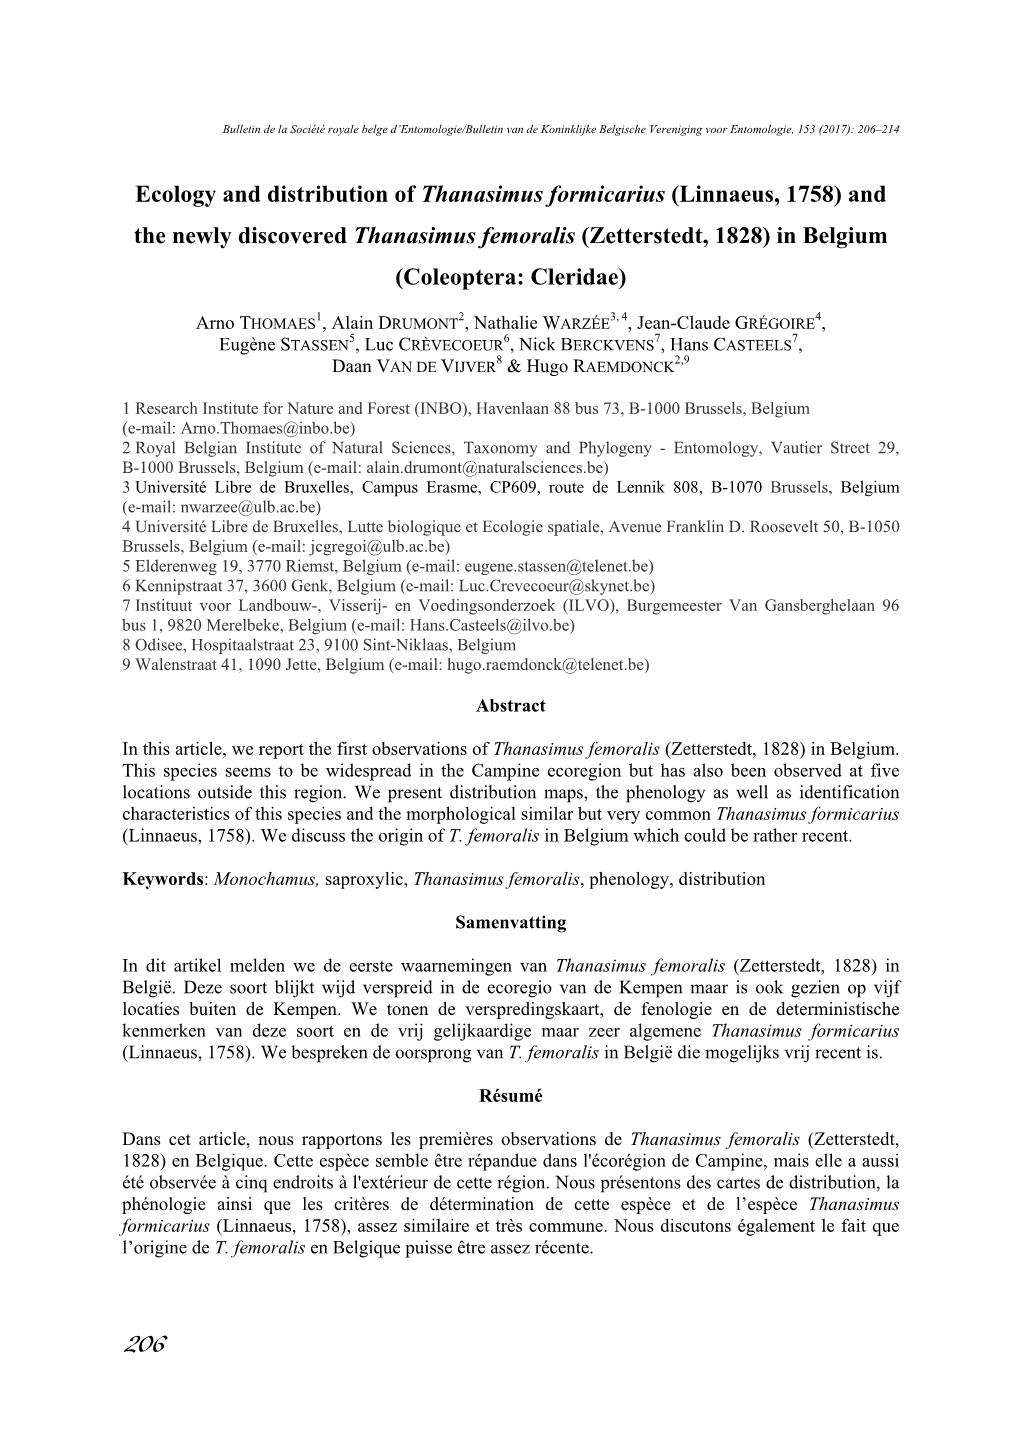 Ecology and Distribution of Thanasimus Formicarius (Linnaeus, 1758) and the Newly Discovered Thanasimus Femoralis (Zetterstedt, 1828) in Belgium